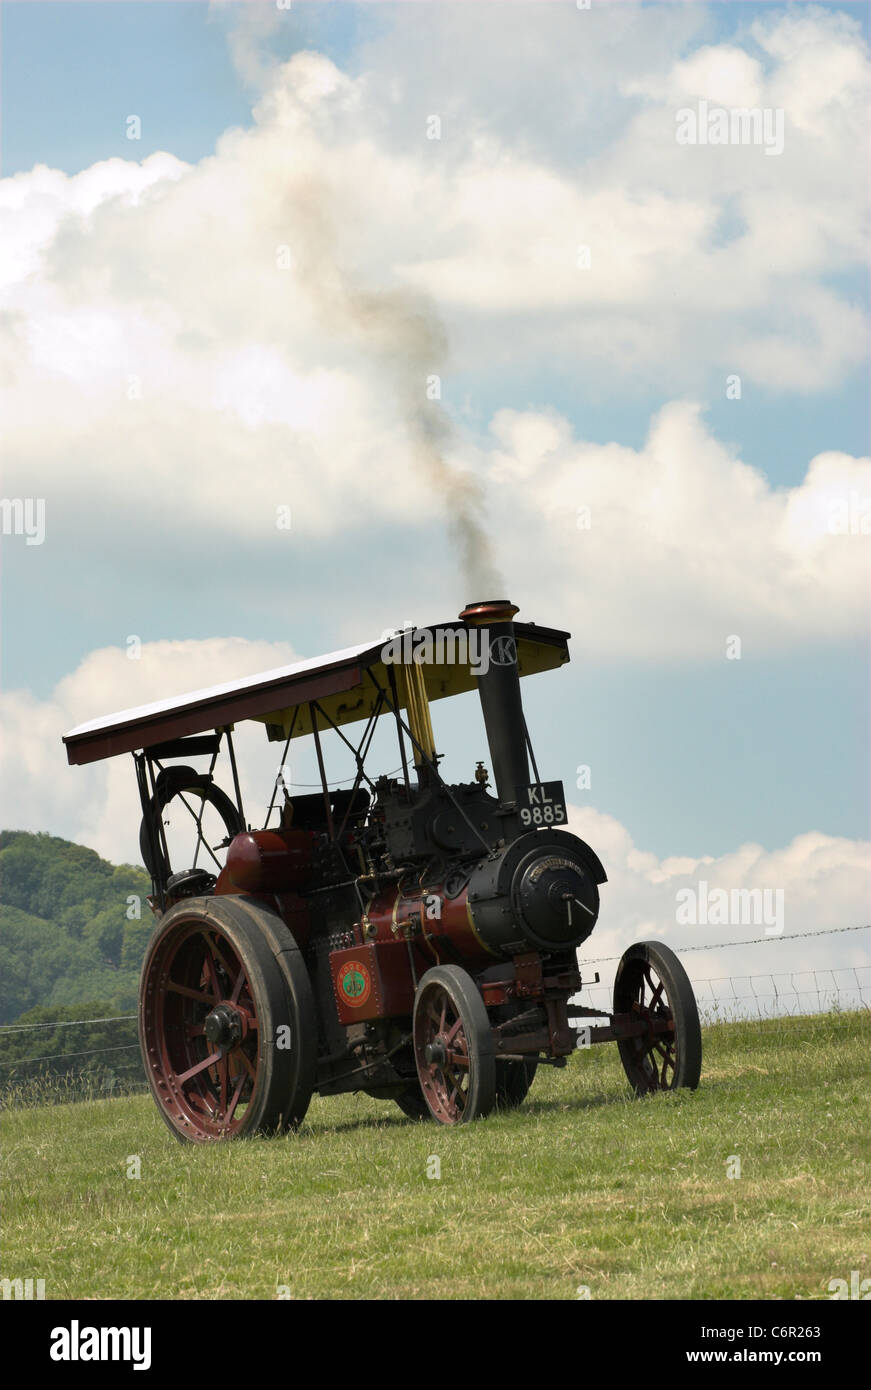 A Tasker B2 Convertible Tractor, Built 1923, R/n KL9885, W/n 1902 pictured  at the Wiston Steam Rally in West Sussex Stock Photo - Alamy